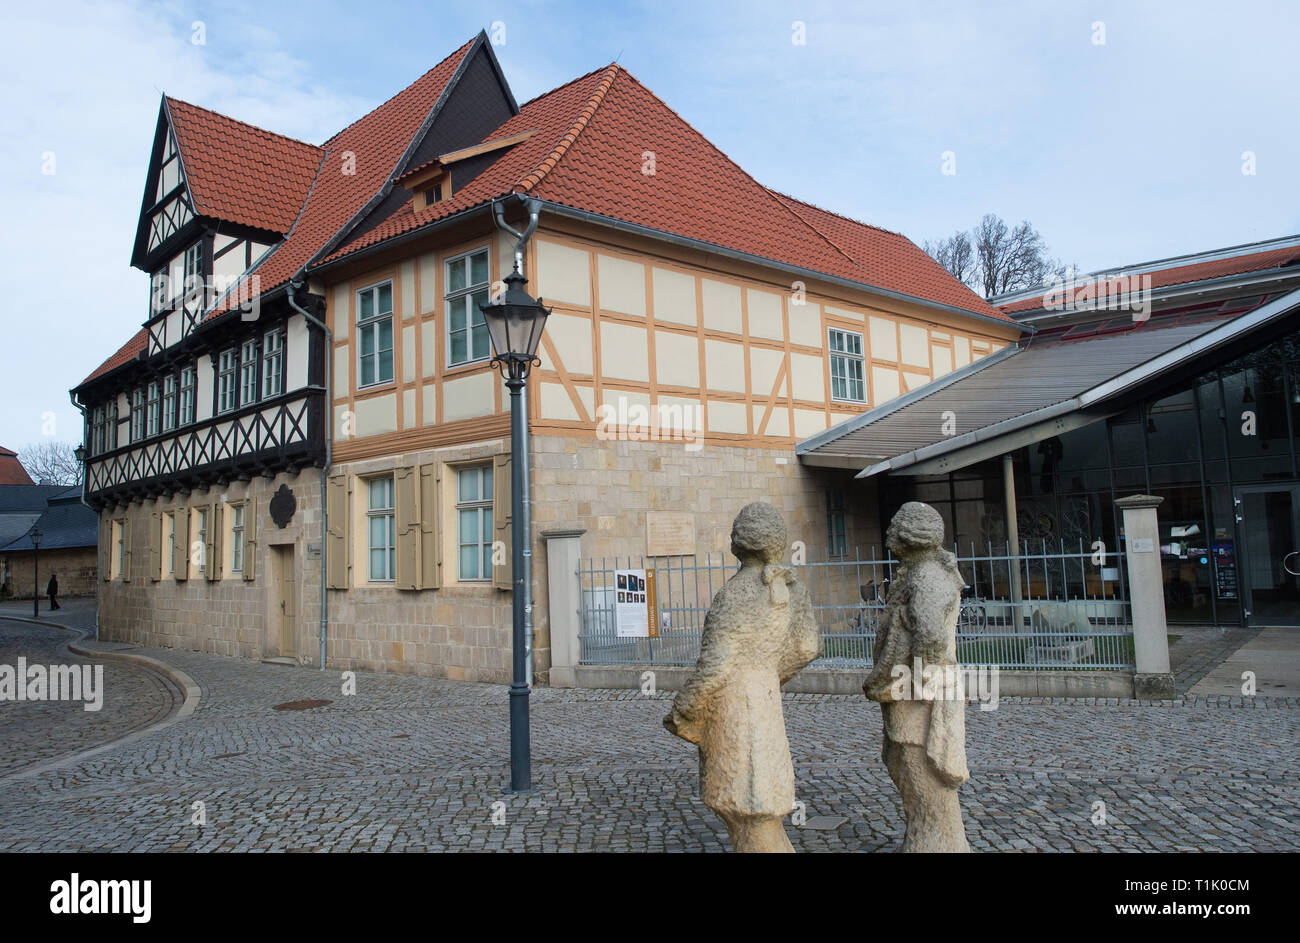 Halberstadt, Germany. 12th Mar, 2019. The Gleim House. Johann Wilhelm Ludwig Gleim (1719-1803) lived there. The Gleimhaus has an exhibition commemorating the poet, patron and passionate collector. A program called 'Gleim300' is planned for the 300th birthday. The Gleimhaus is one of the oldest German literary museums and was established in 1862 in the former Gleim residence. (to dpa 'A networker becomes 300 - How a museum accompanies Gleim's birthday') Credit: Klaus-Dietmar Gabbert/dpa-Zentralbild/dpa/Alamy Live News Stock Photo